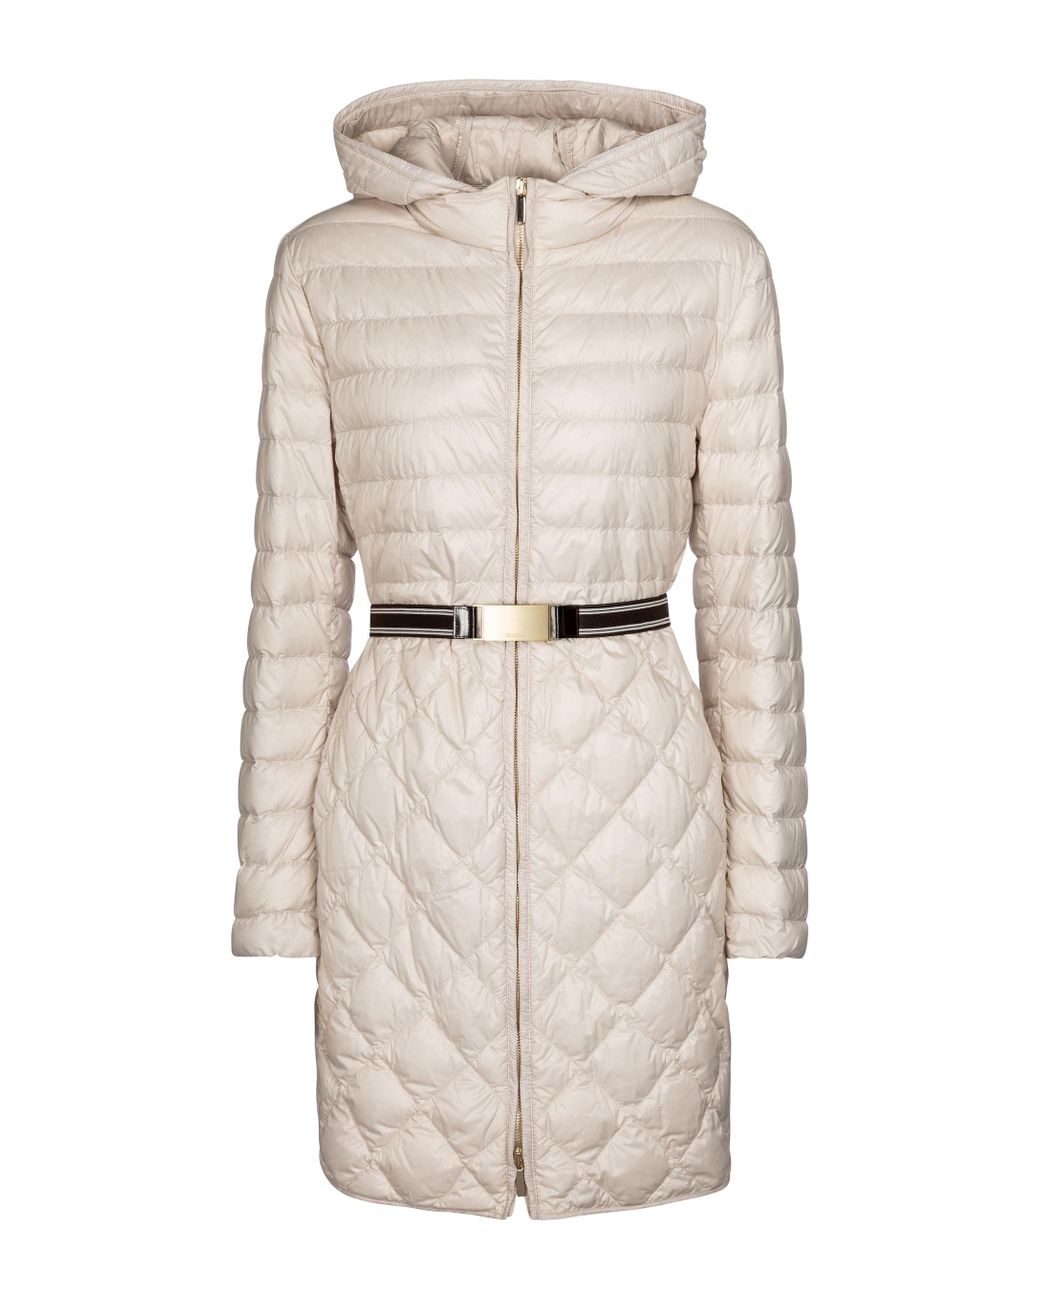 Max Mara The Cube Etrevi Quilted Down Coat in Beige (Natural) - Lyst